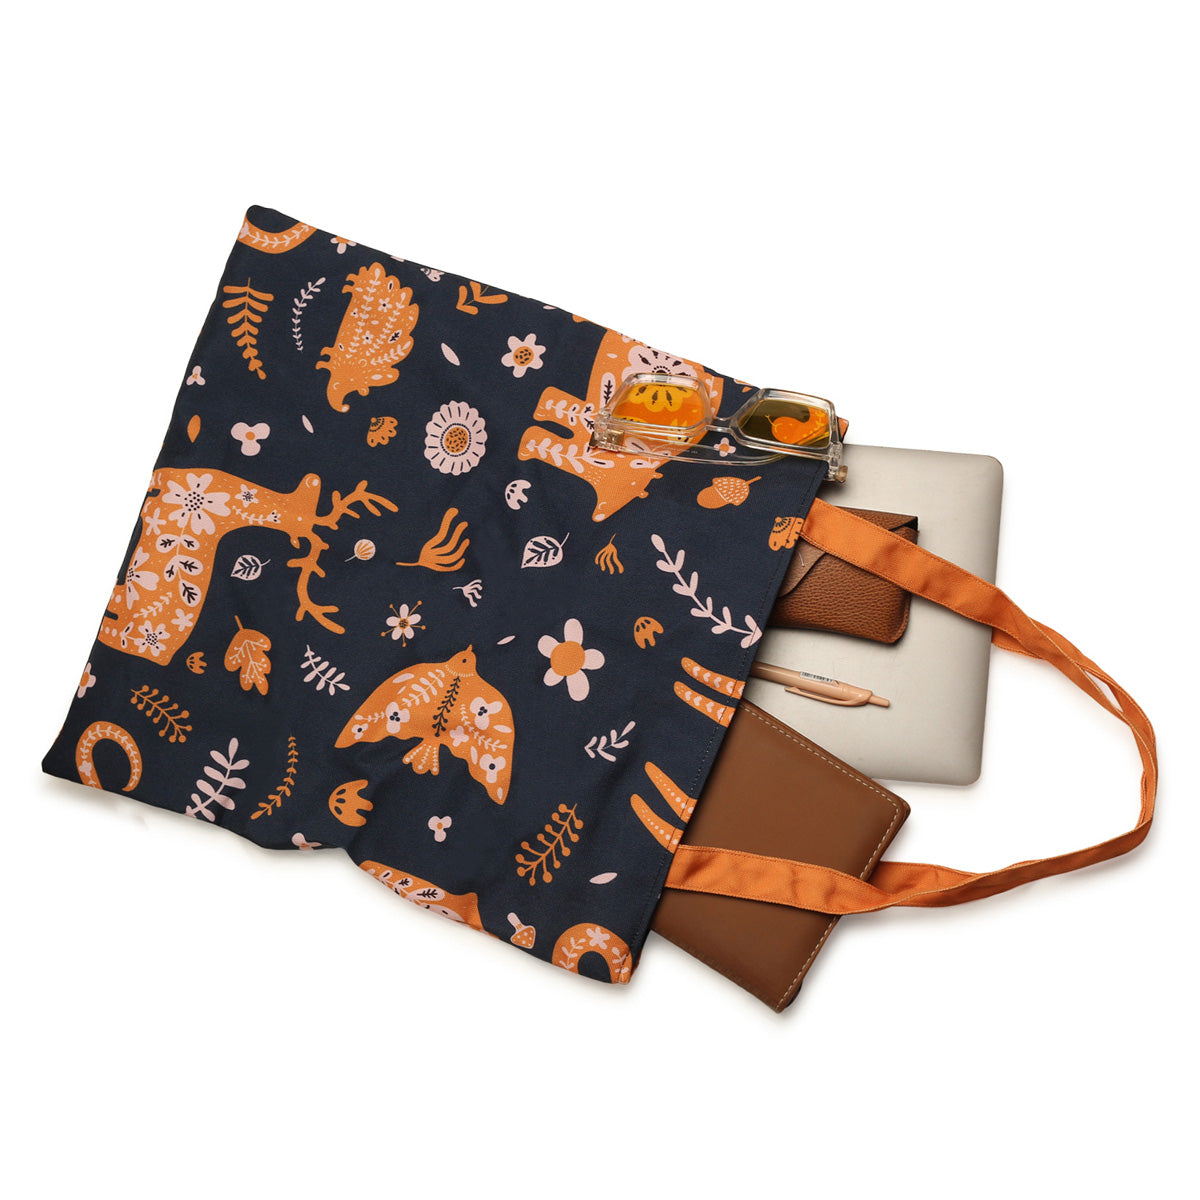 A dark blue tote bag with orange animal and plant prints, an orange strap, and brown leather accents, containing a laptop, a notebook, a pen, and a pair of sunglasses.